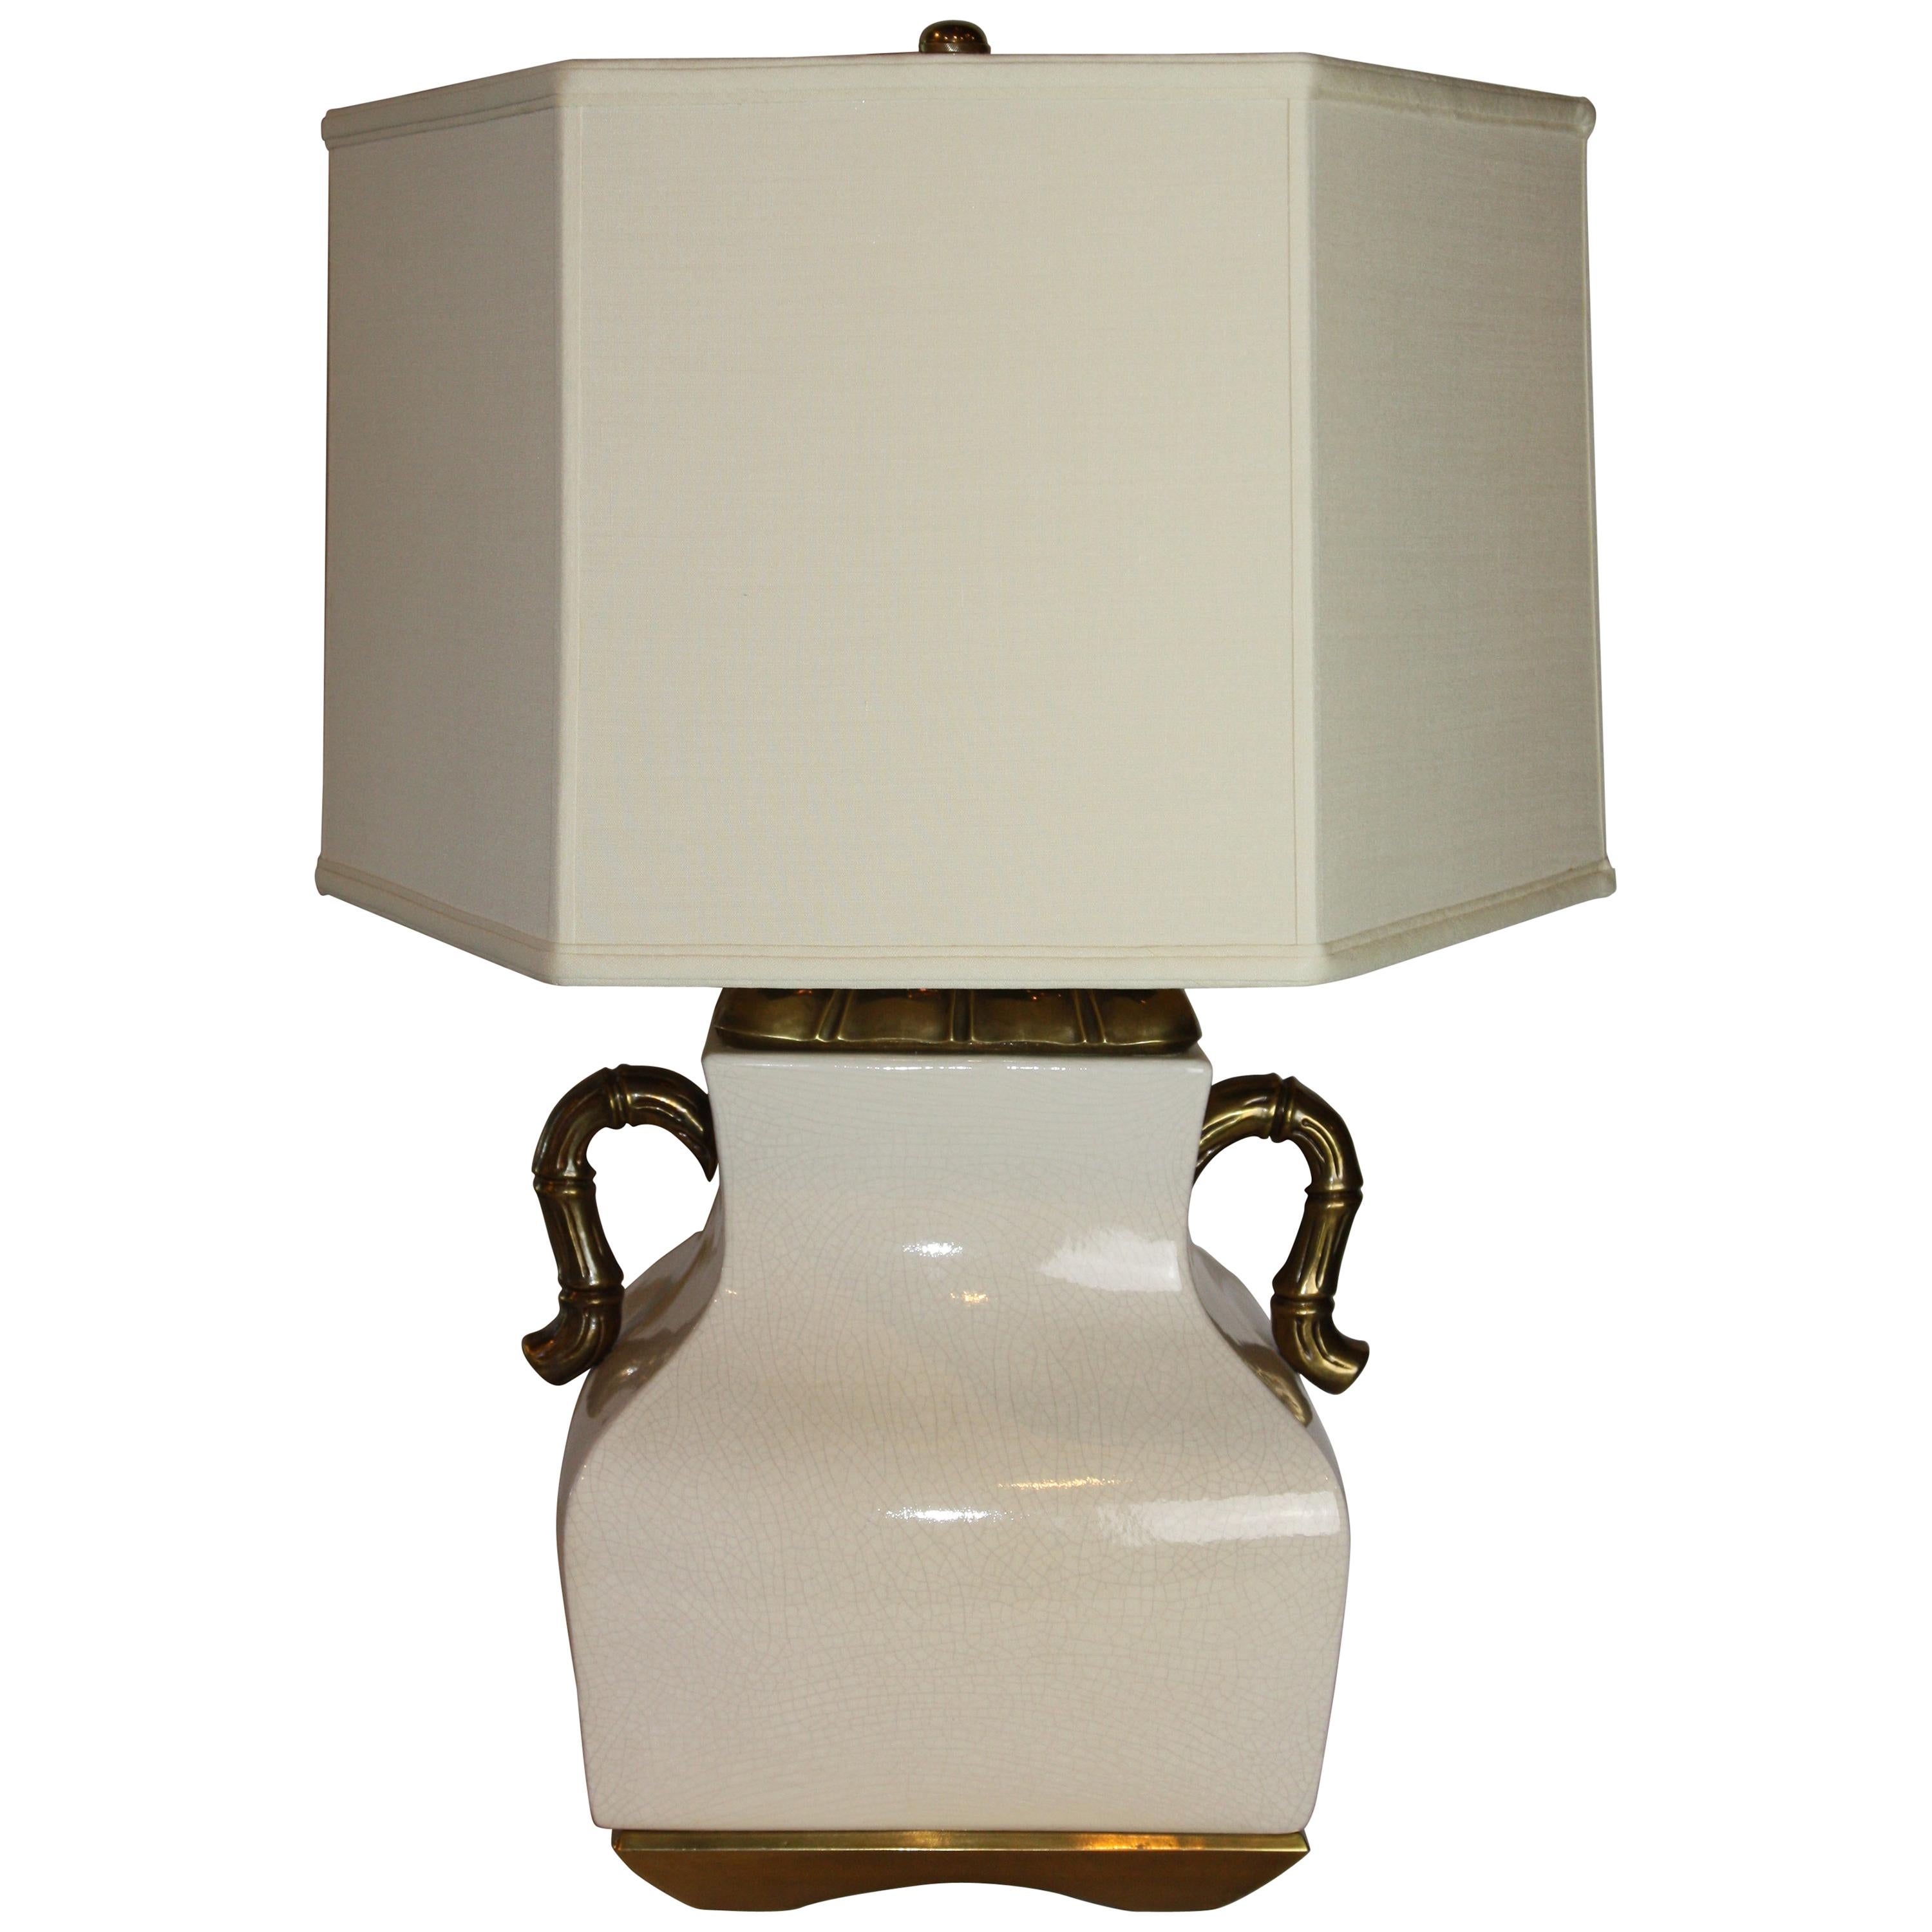 Chapman Double-Handled Urn Lamp with White Crackle Glaze and Hexagonal Shade